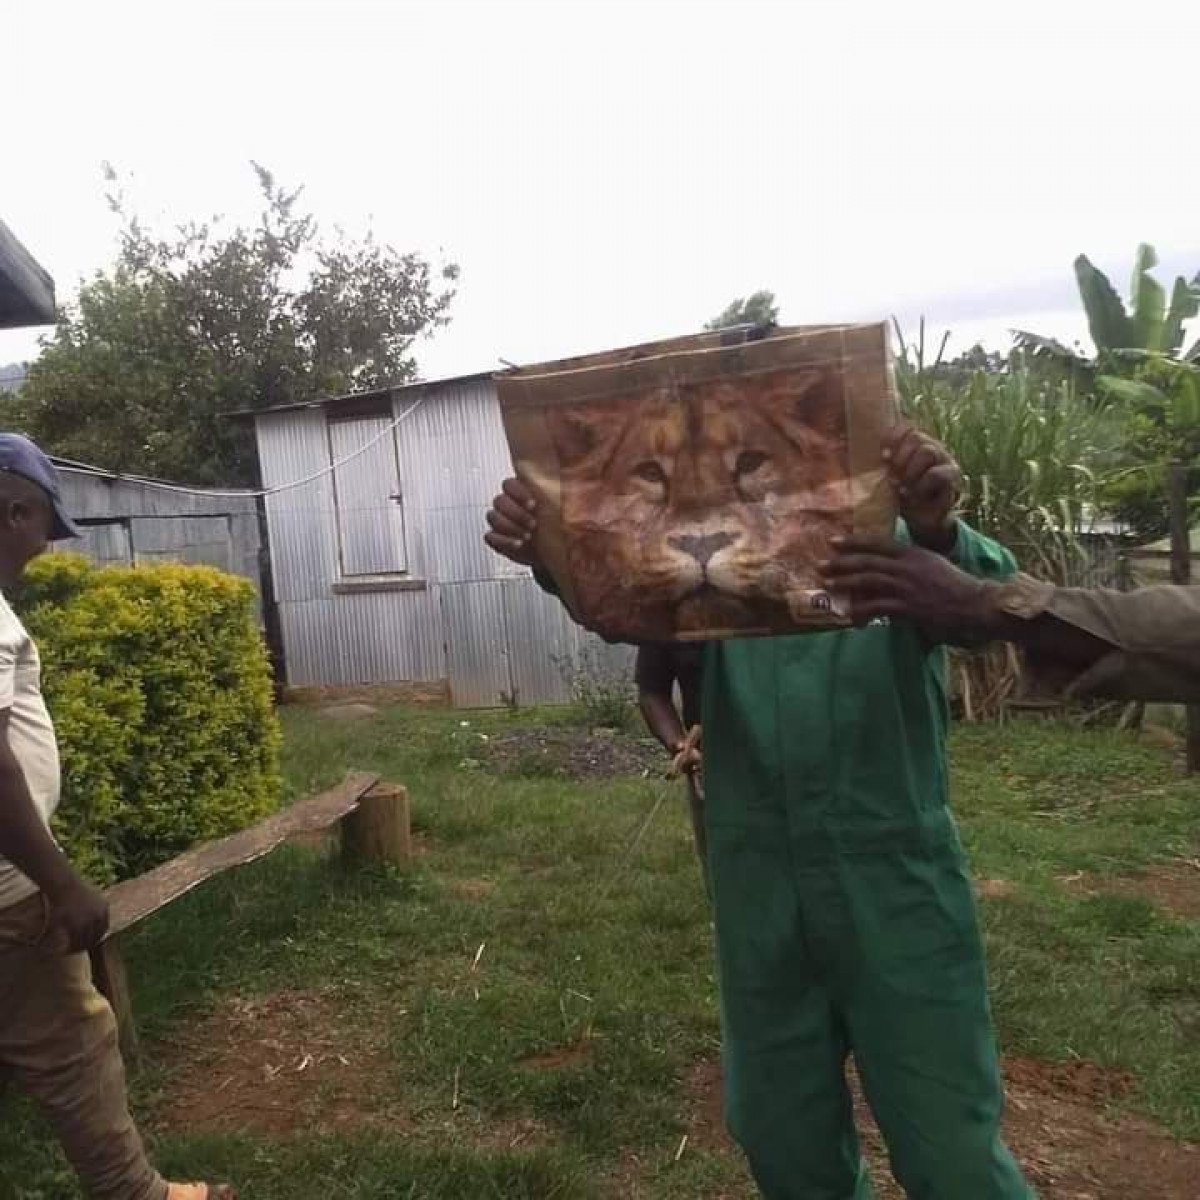 Officials who went to report a lion in Kenya encountered the bag #2